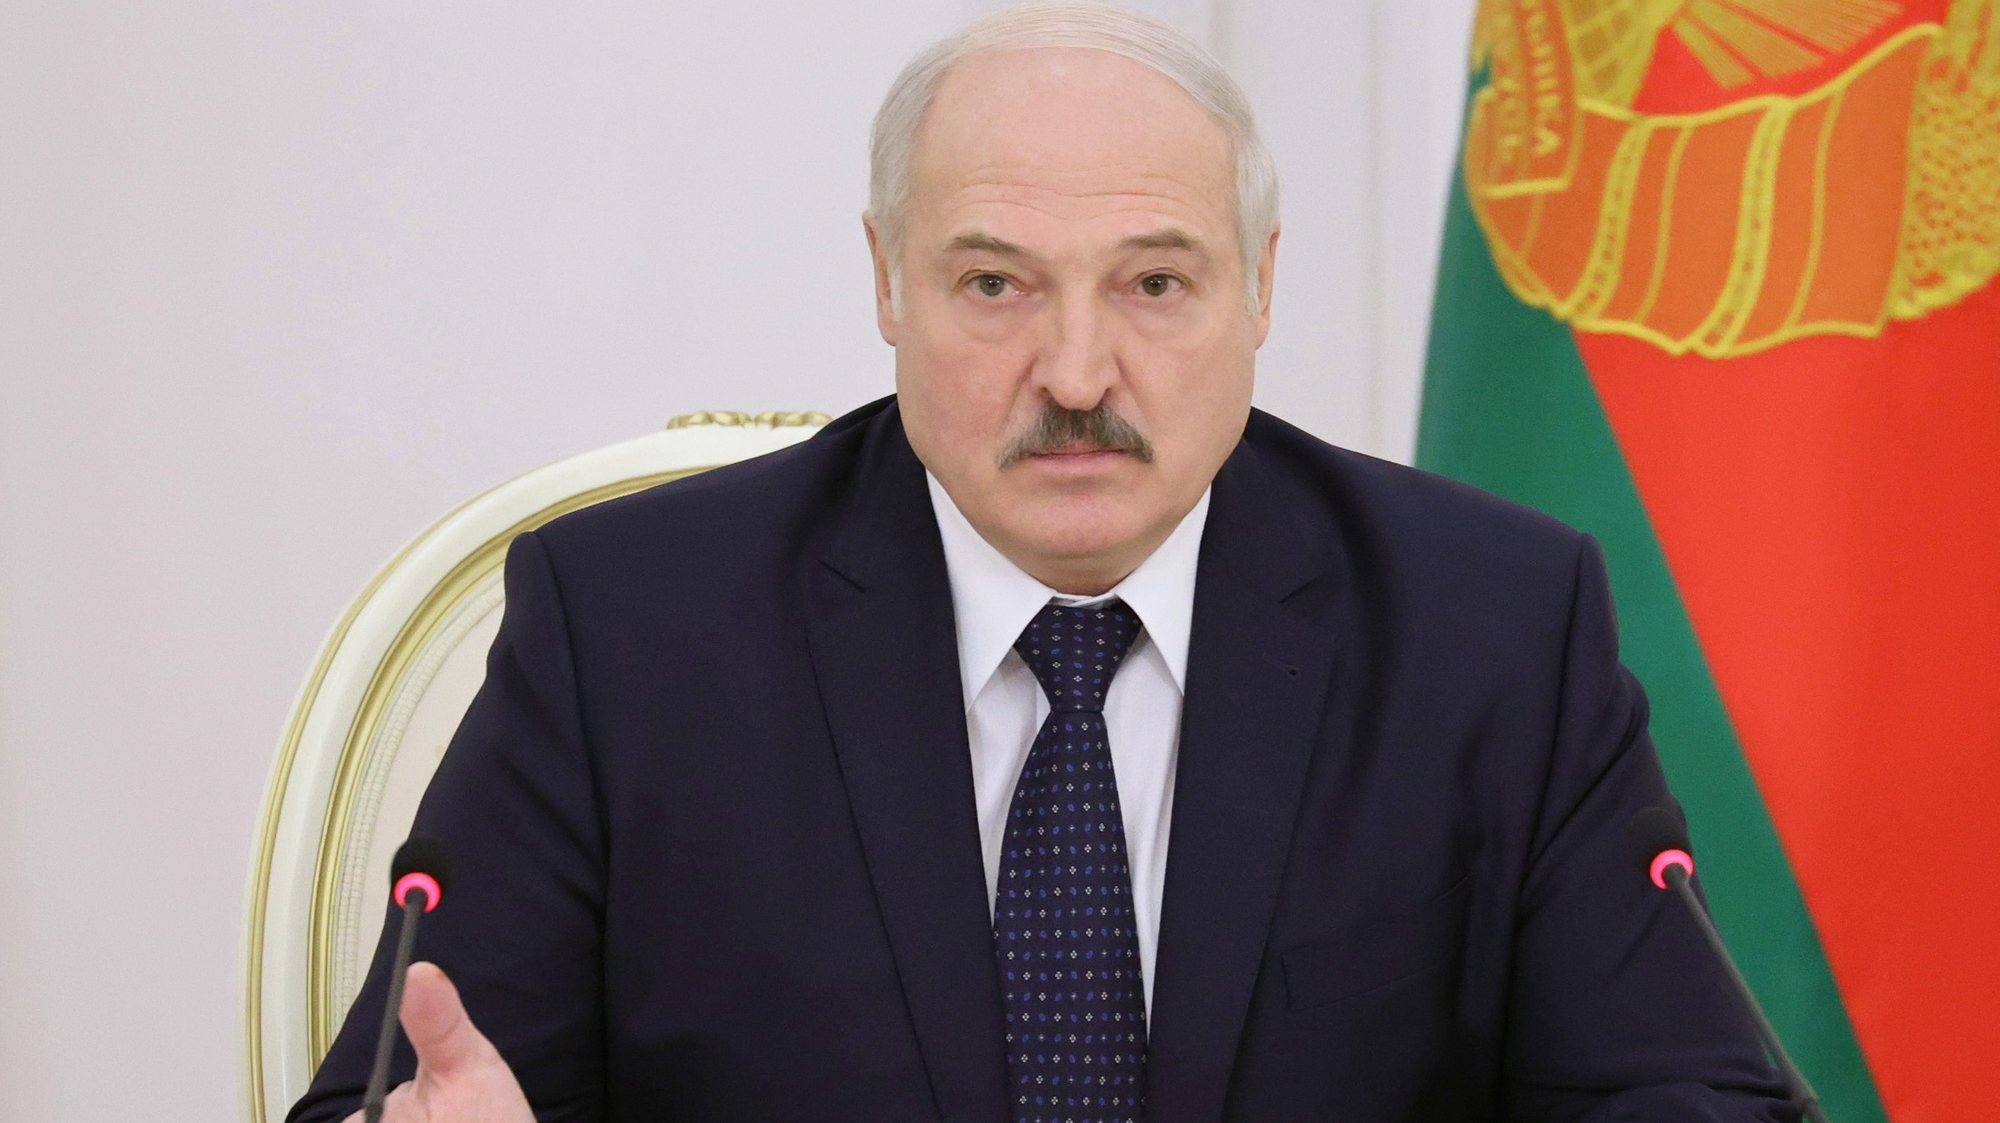 epa09318612 (FILE) Belarusian President Alexander Lukashenko talks during a meeting for economy assessment for 2020 and a draft forecast documents for 2021 in Minsk, Belarus, 07 December 2020 (reissued 02 July 2021). President Lukashenko on 02 July 2021, during a solemn meeting marking the Independence day, has ordered to close the border with Ukraine to prevent the significant incursion of weapons from Ukraine to Belarus, according to Belarusian state news agency Belta.  EPA/MAXIM GUCHEK/ POOL MANDATORY CREDIT *** Local Caption *** 56548158